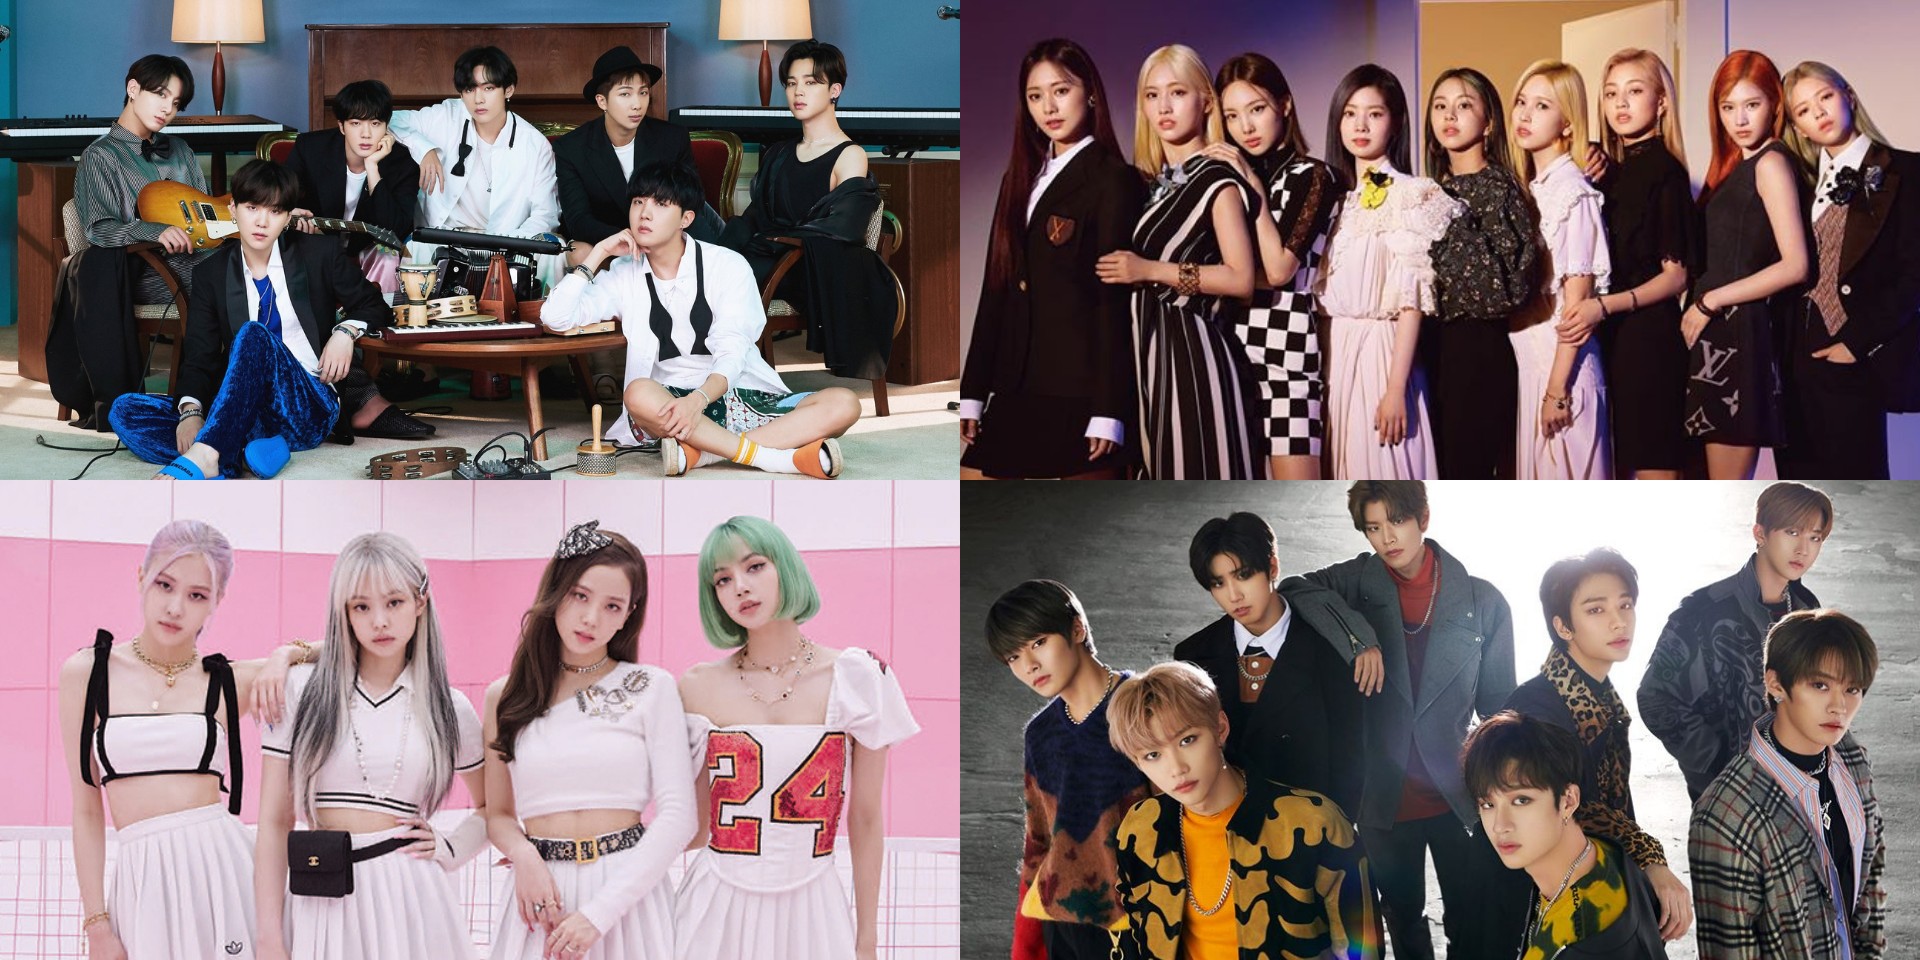 In pictures: 5 Times, BLACKPINK And BTS Members Burned The